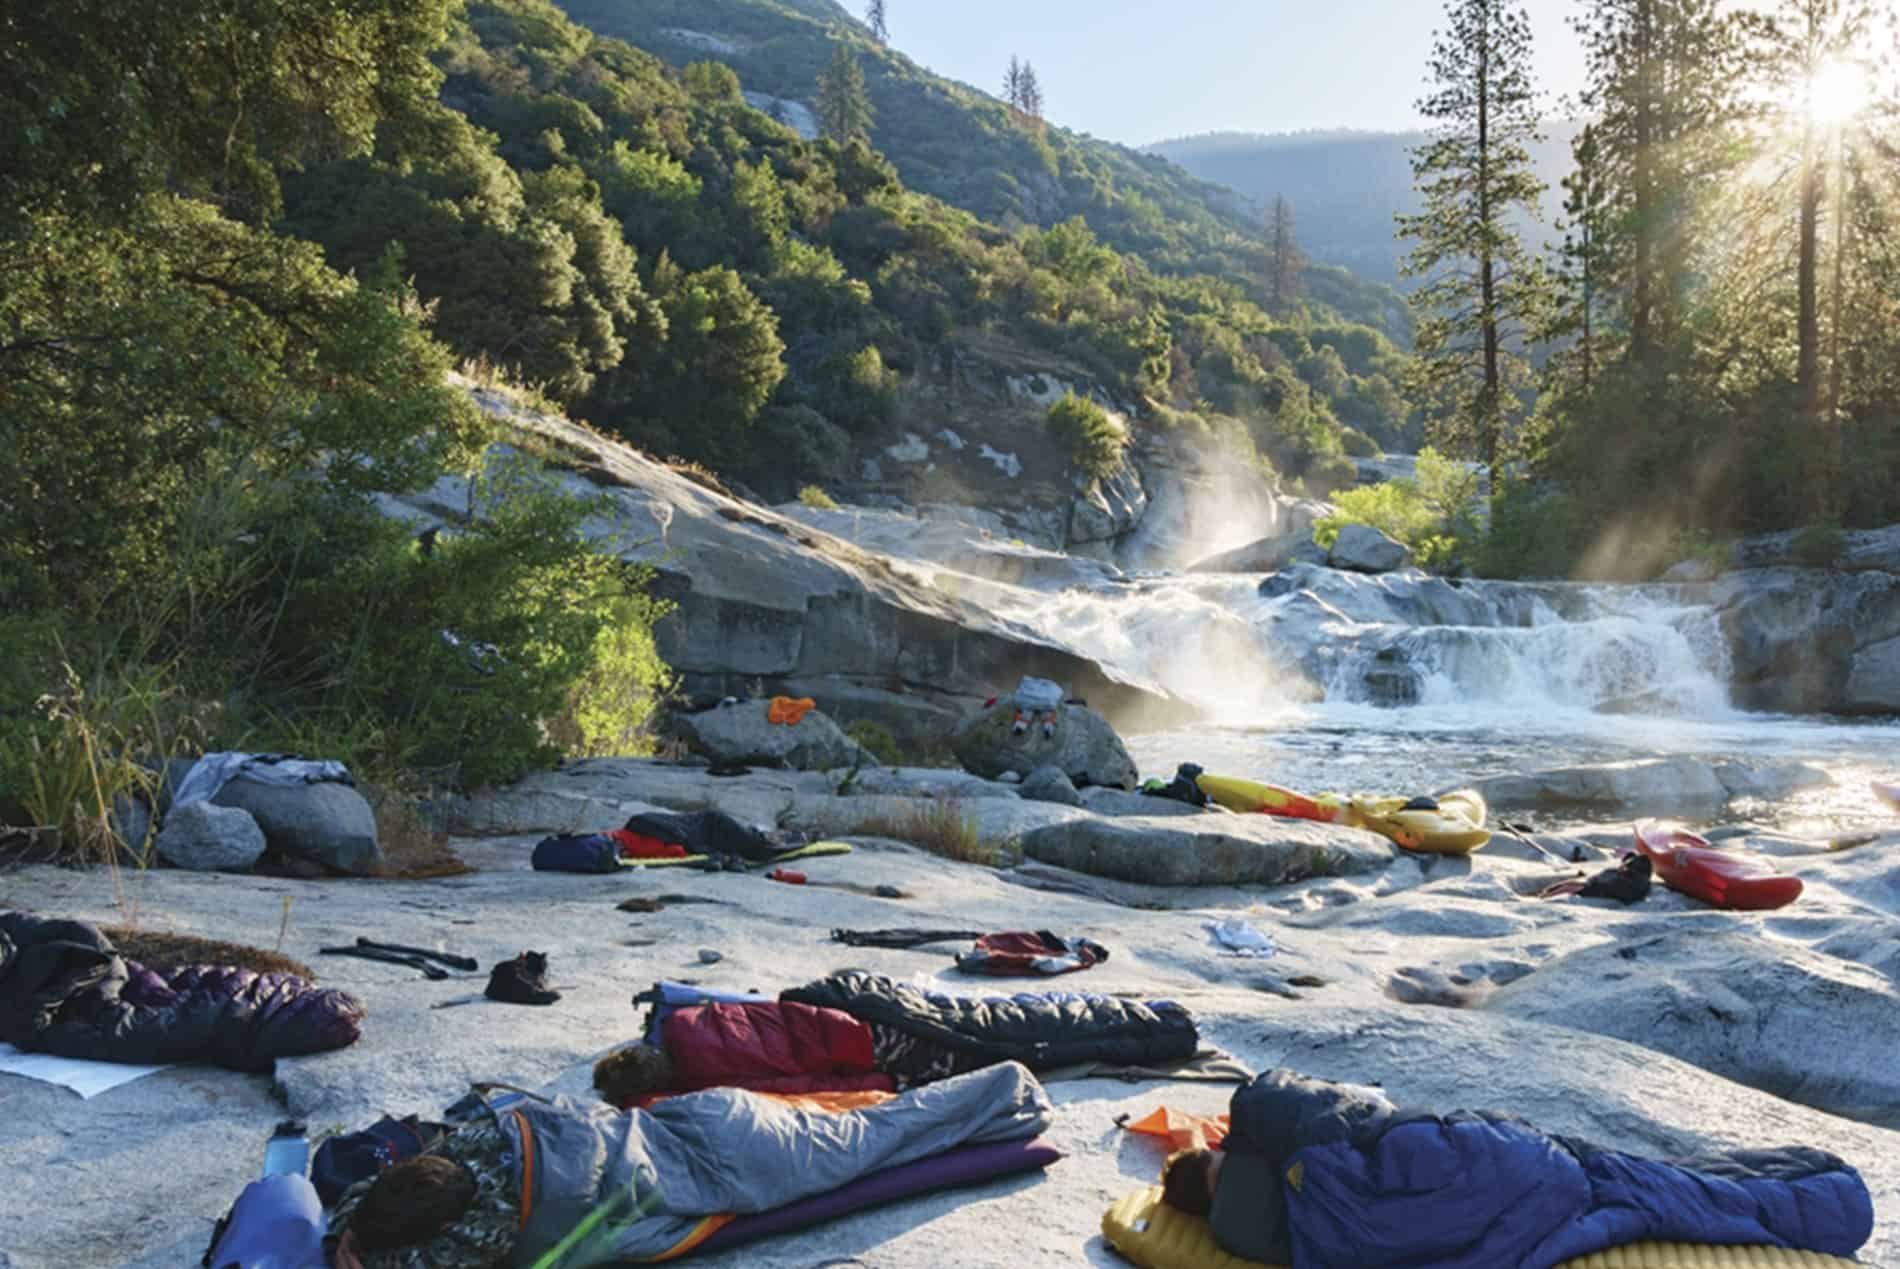 Paddlers Sleep Next To The River